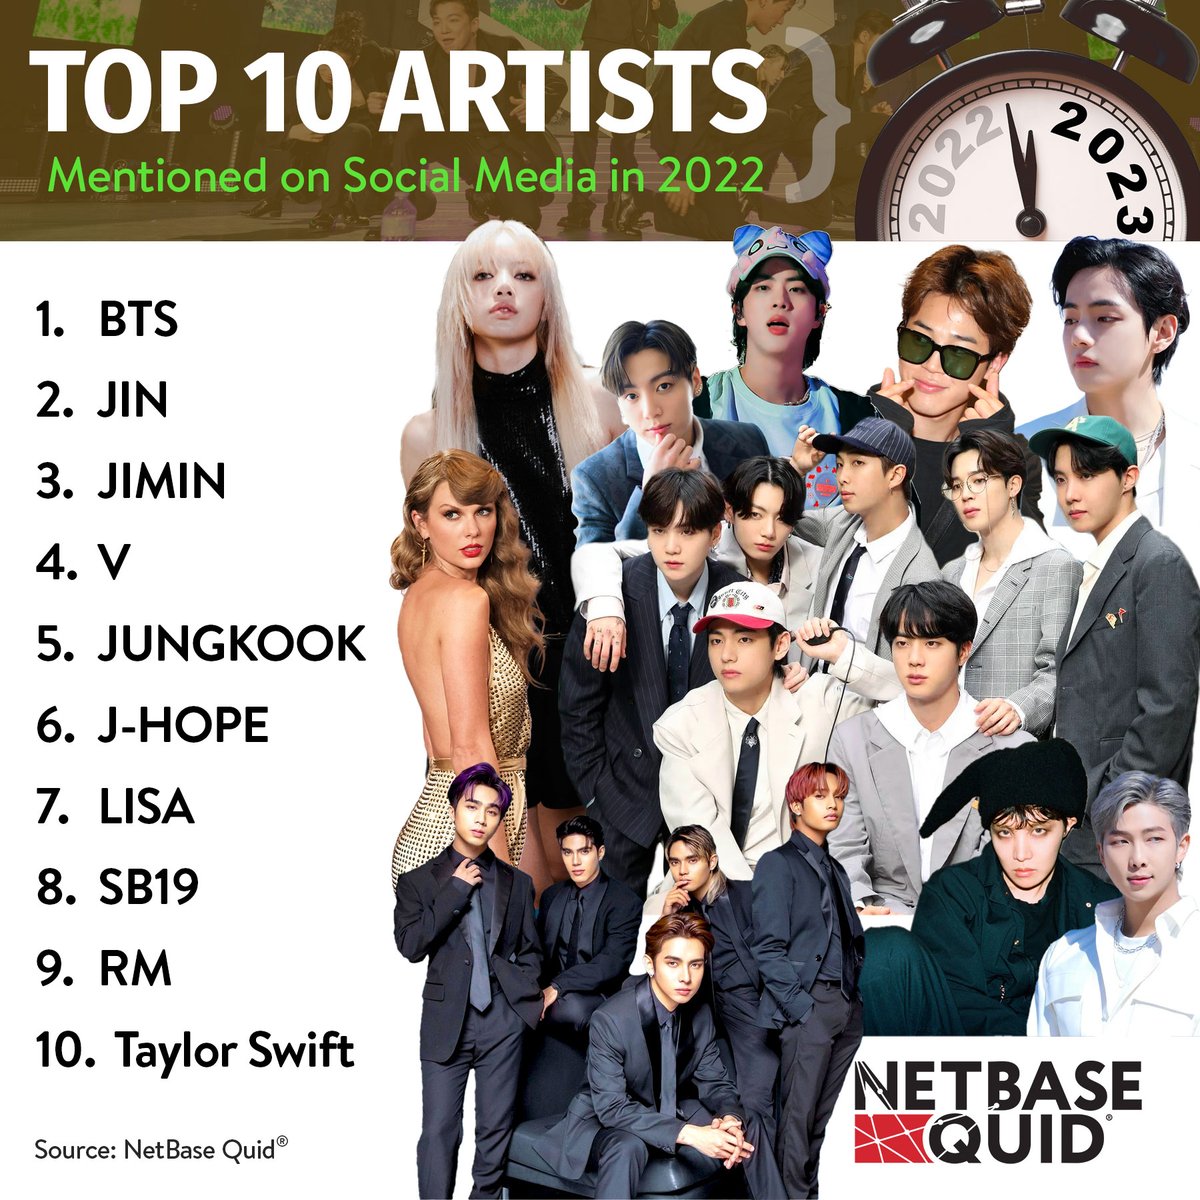 Each month, we share the top 10 artist mentions using our #SocialAnalytics platform. Now, we're sharing the top 10 mentions for 2022, lets just say that the #BTSArmy def showed up!

1) #BTS
2) #JIN
3) #JIMIN
4) #V
5) #JUNGKOOK
6) #JHOPE
7) #LISA
8) #SB19 
9) #RM
10) #TaylorSwift